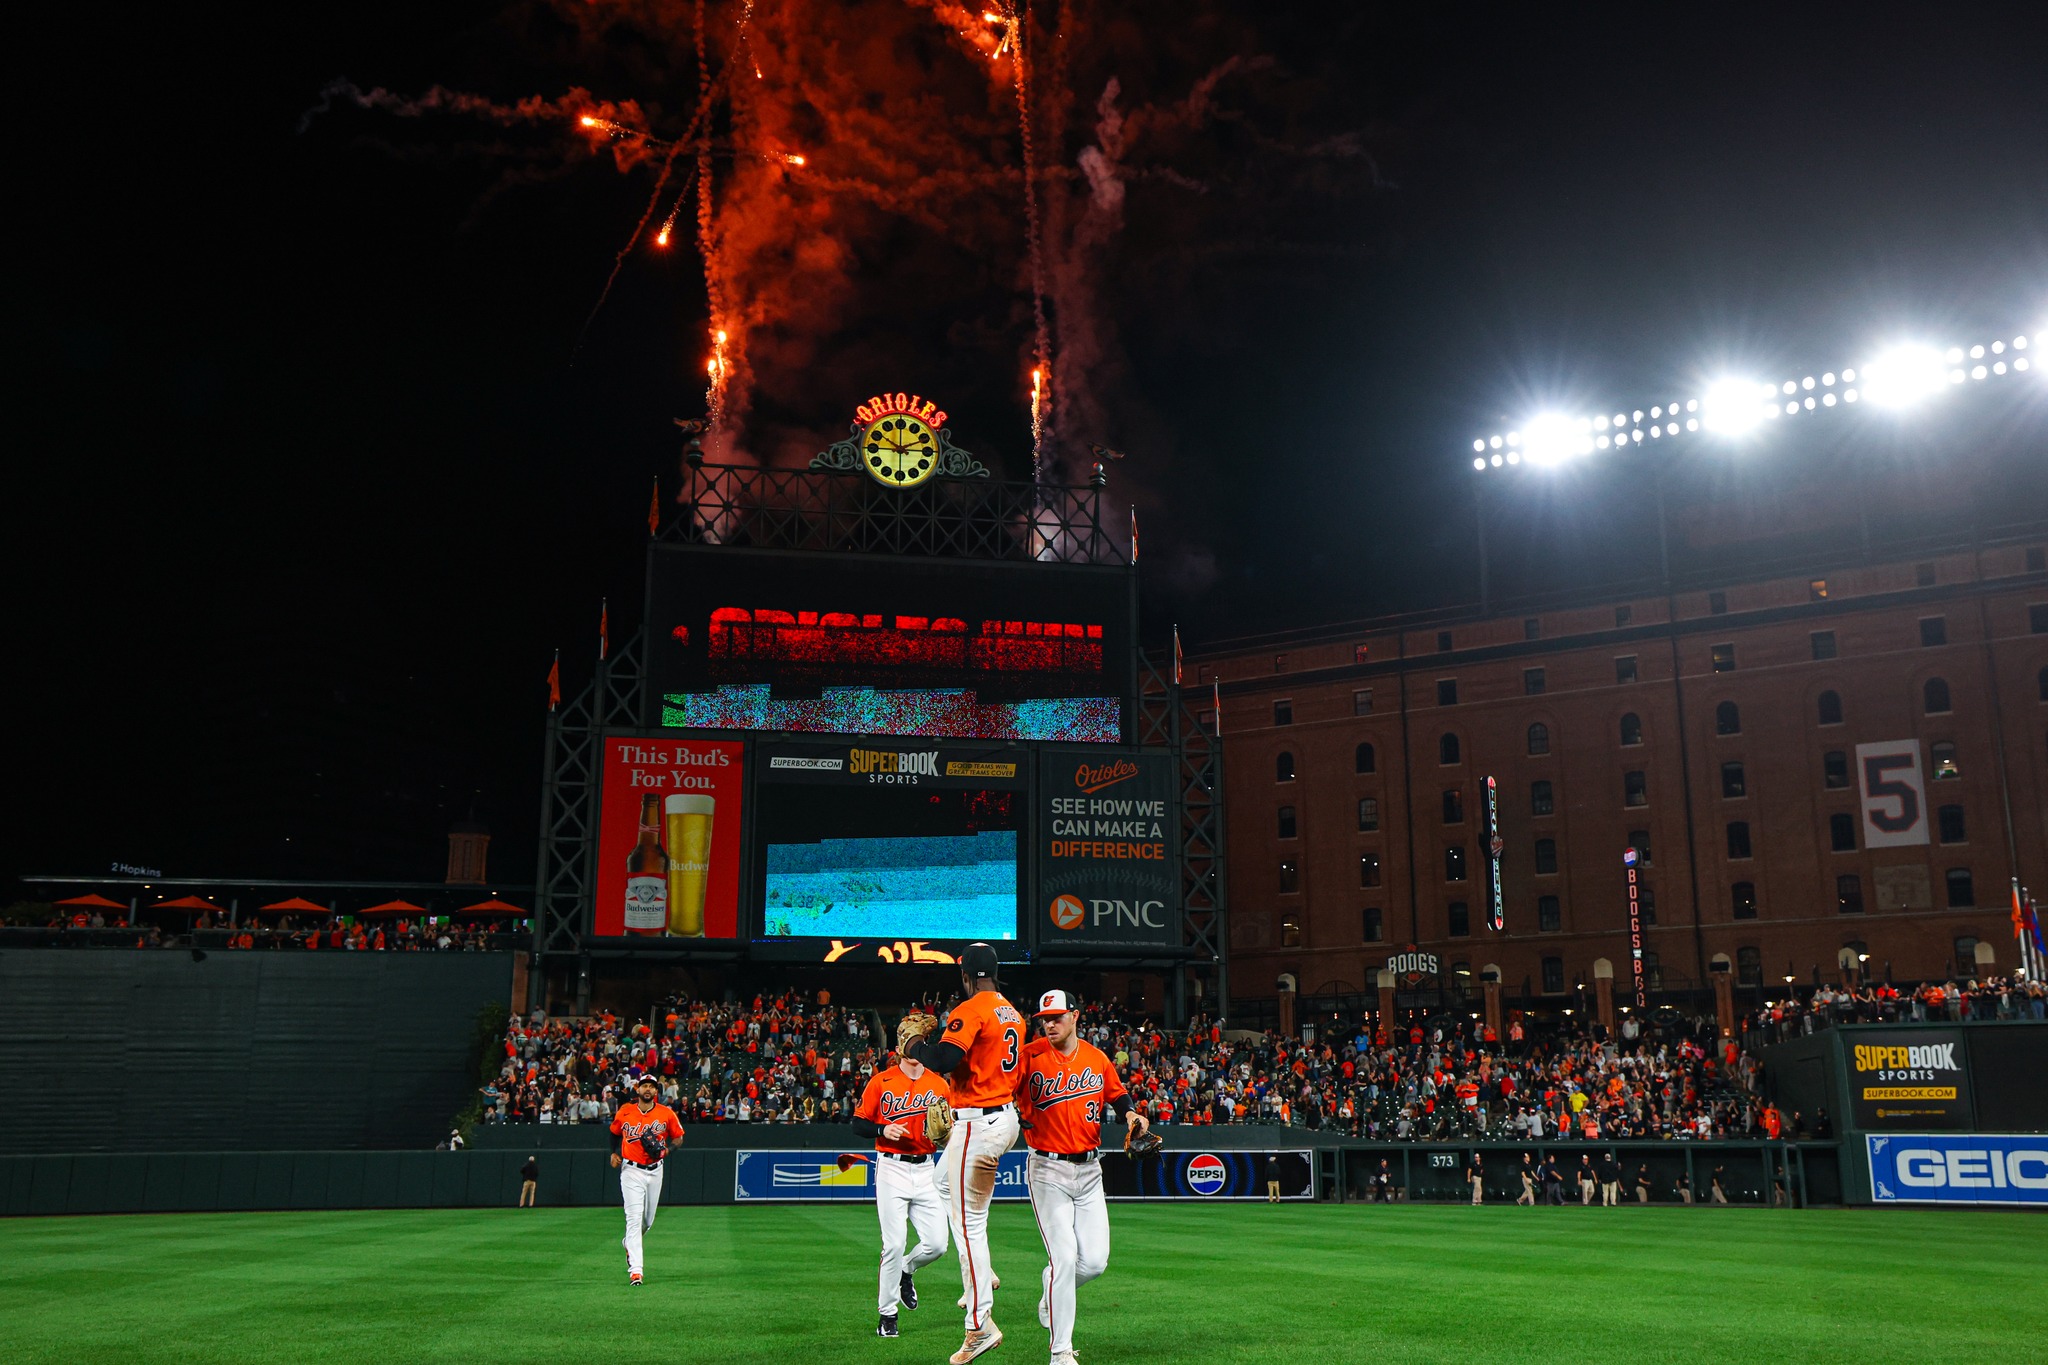 Orioles outfield and infield face different storylines entering this season  - Camden Chat